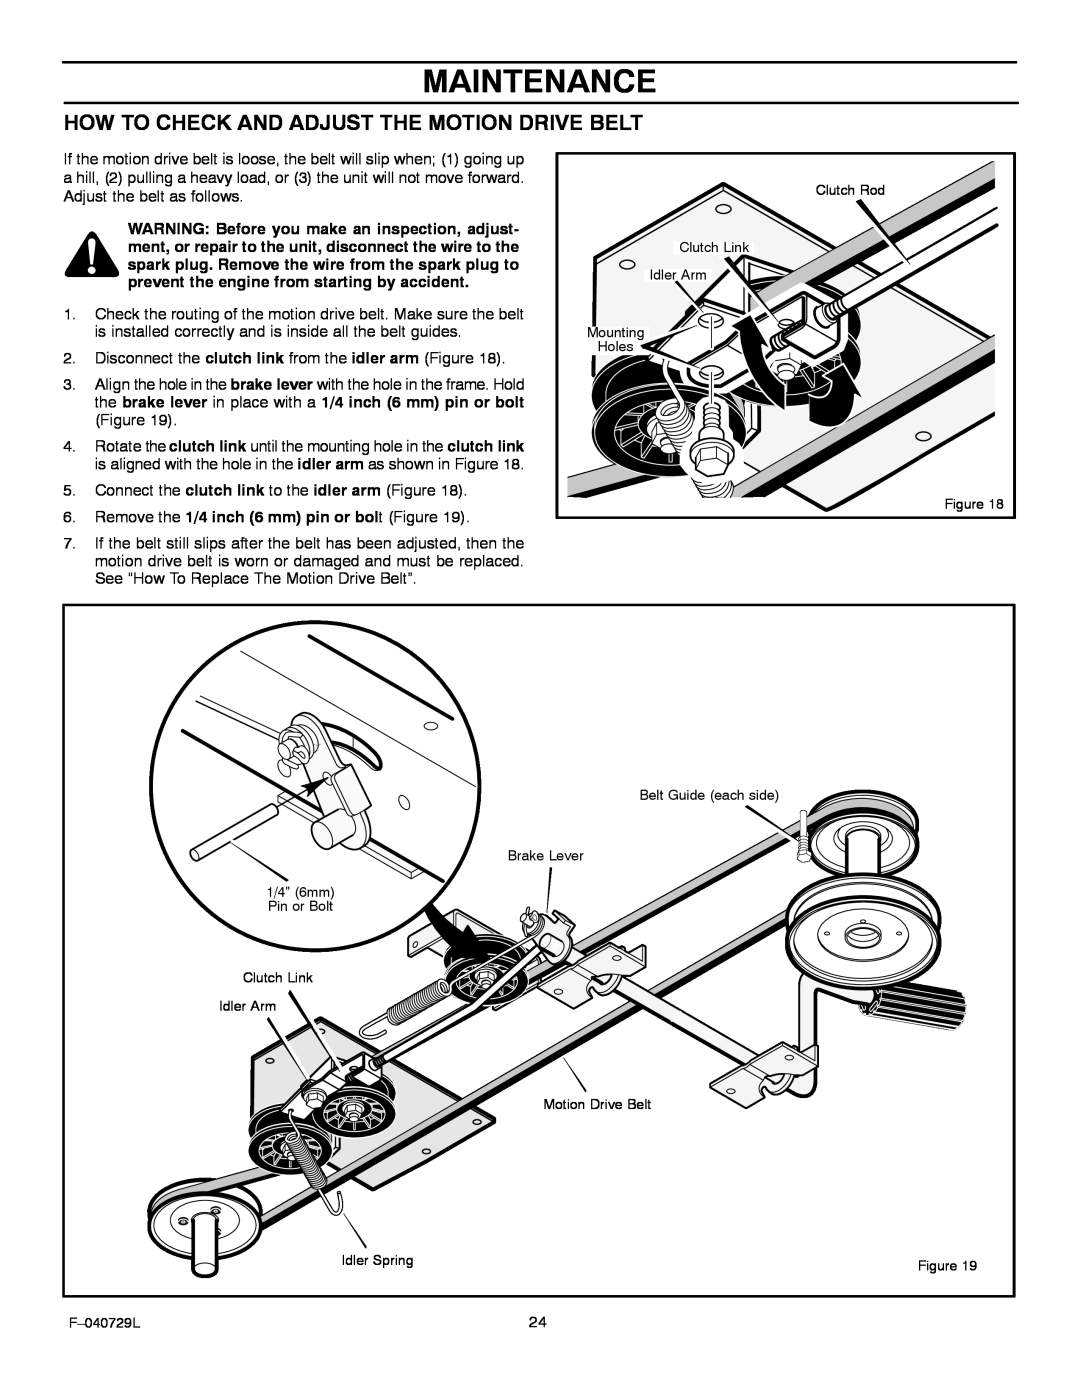 Murray 425620x92A manual Maintenance, How To Check And Adjust The Motion Drive Belt 